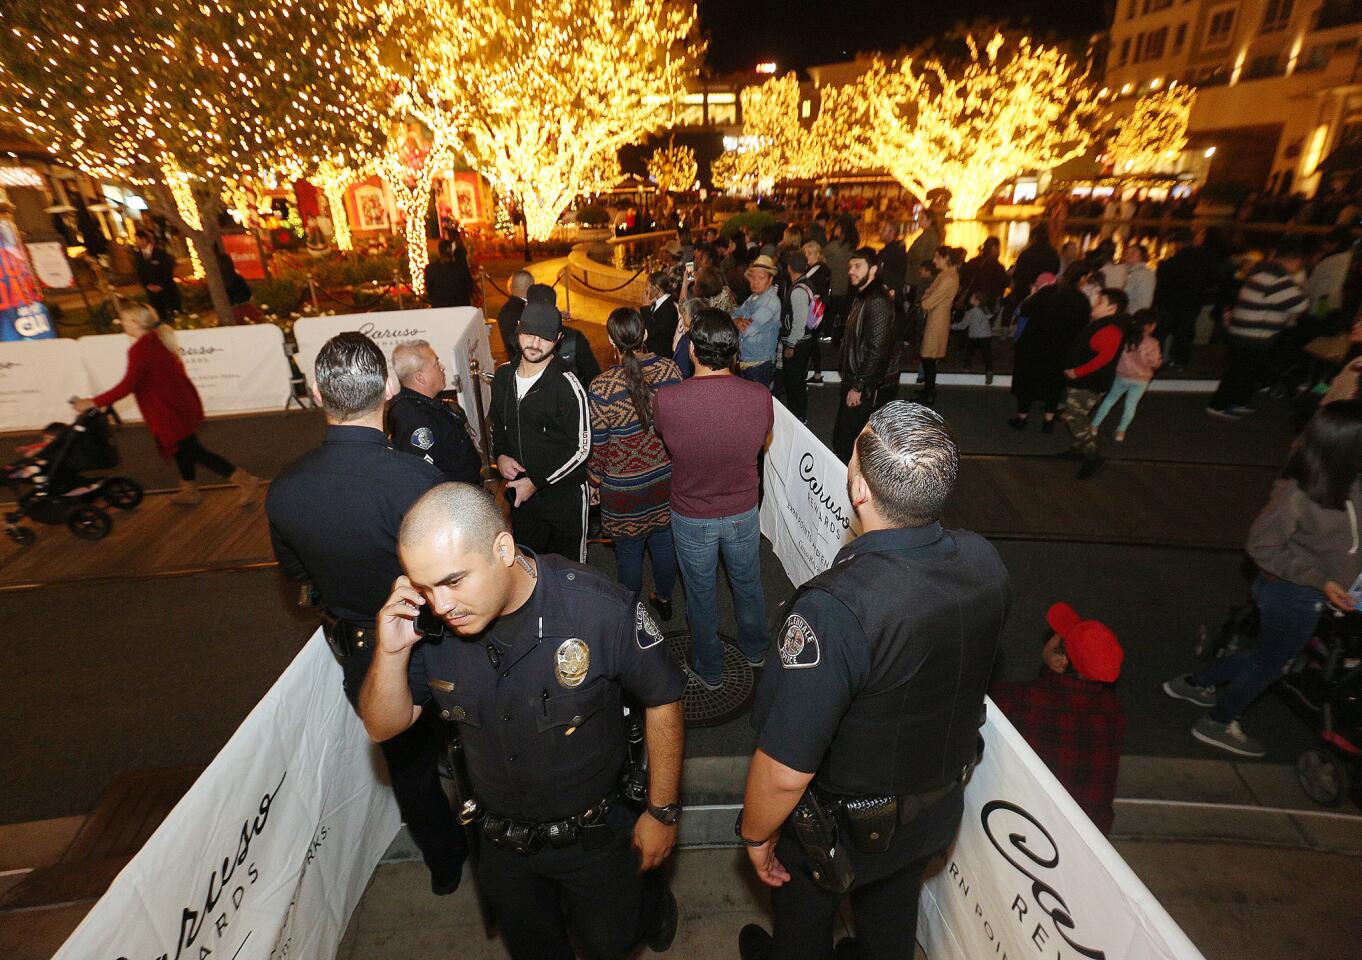 Photo Gallery: Annual Tree Lighting ceremony at Americana at Brand